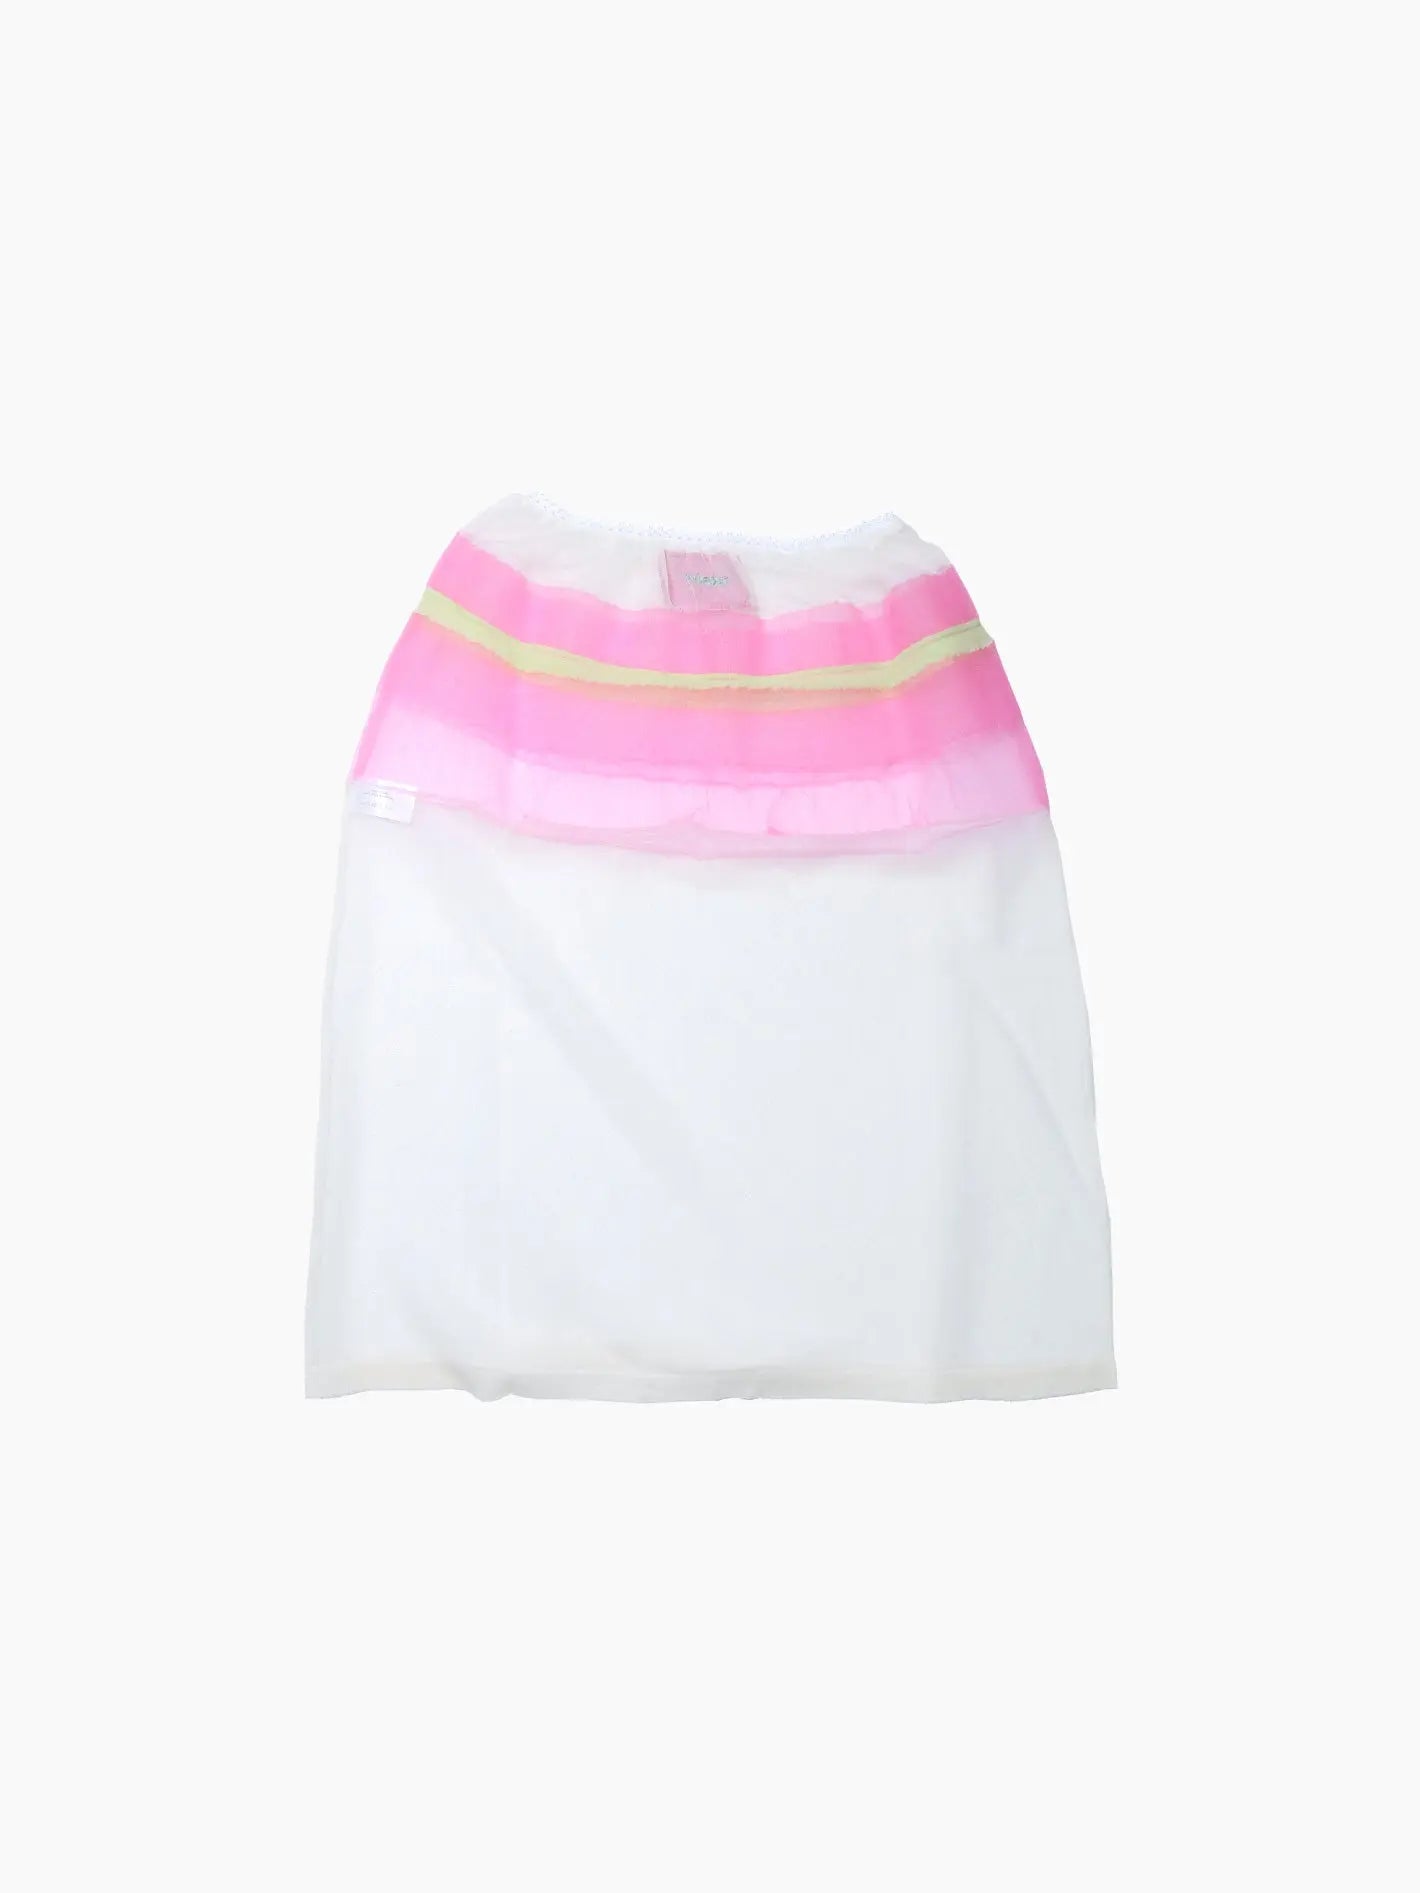 An image of the Spencer Skirt Ecru available at BassalStore, featuring a white lower section and a pink upper section. The skirt has two horizontal lime-green stripes near the top and an elastic waistband for a comfortable fit. This stylish item is brought to you by Bielo.